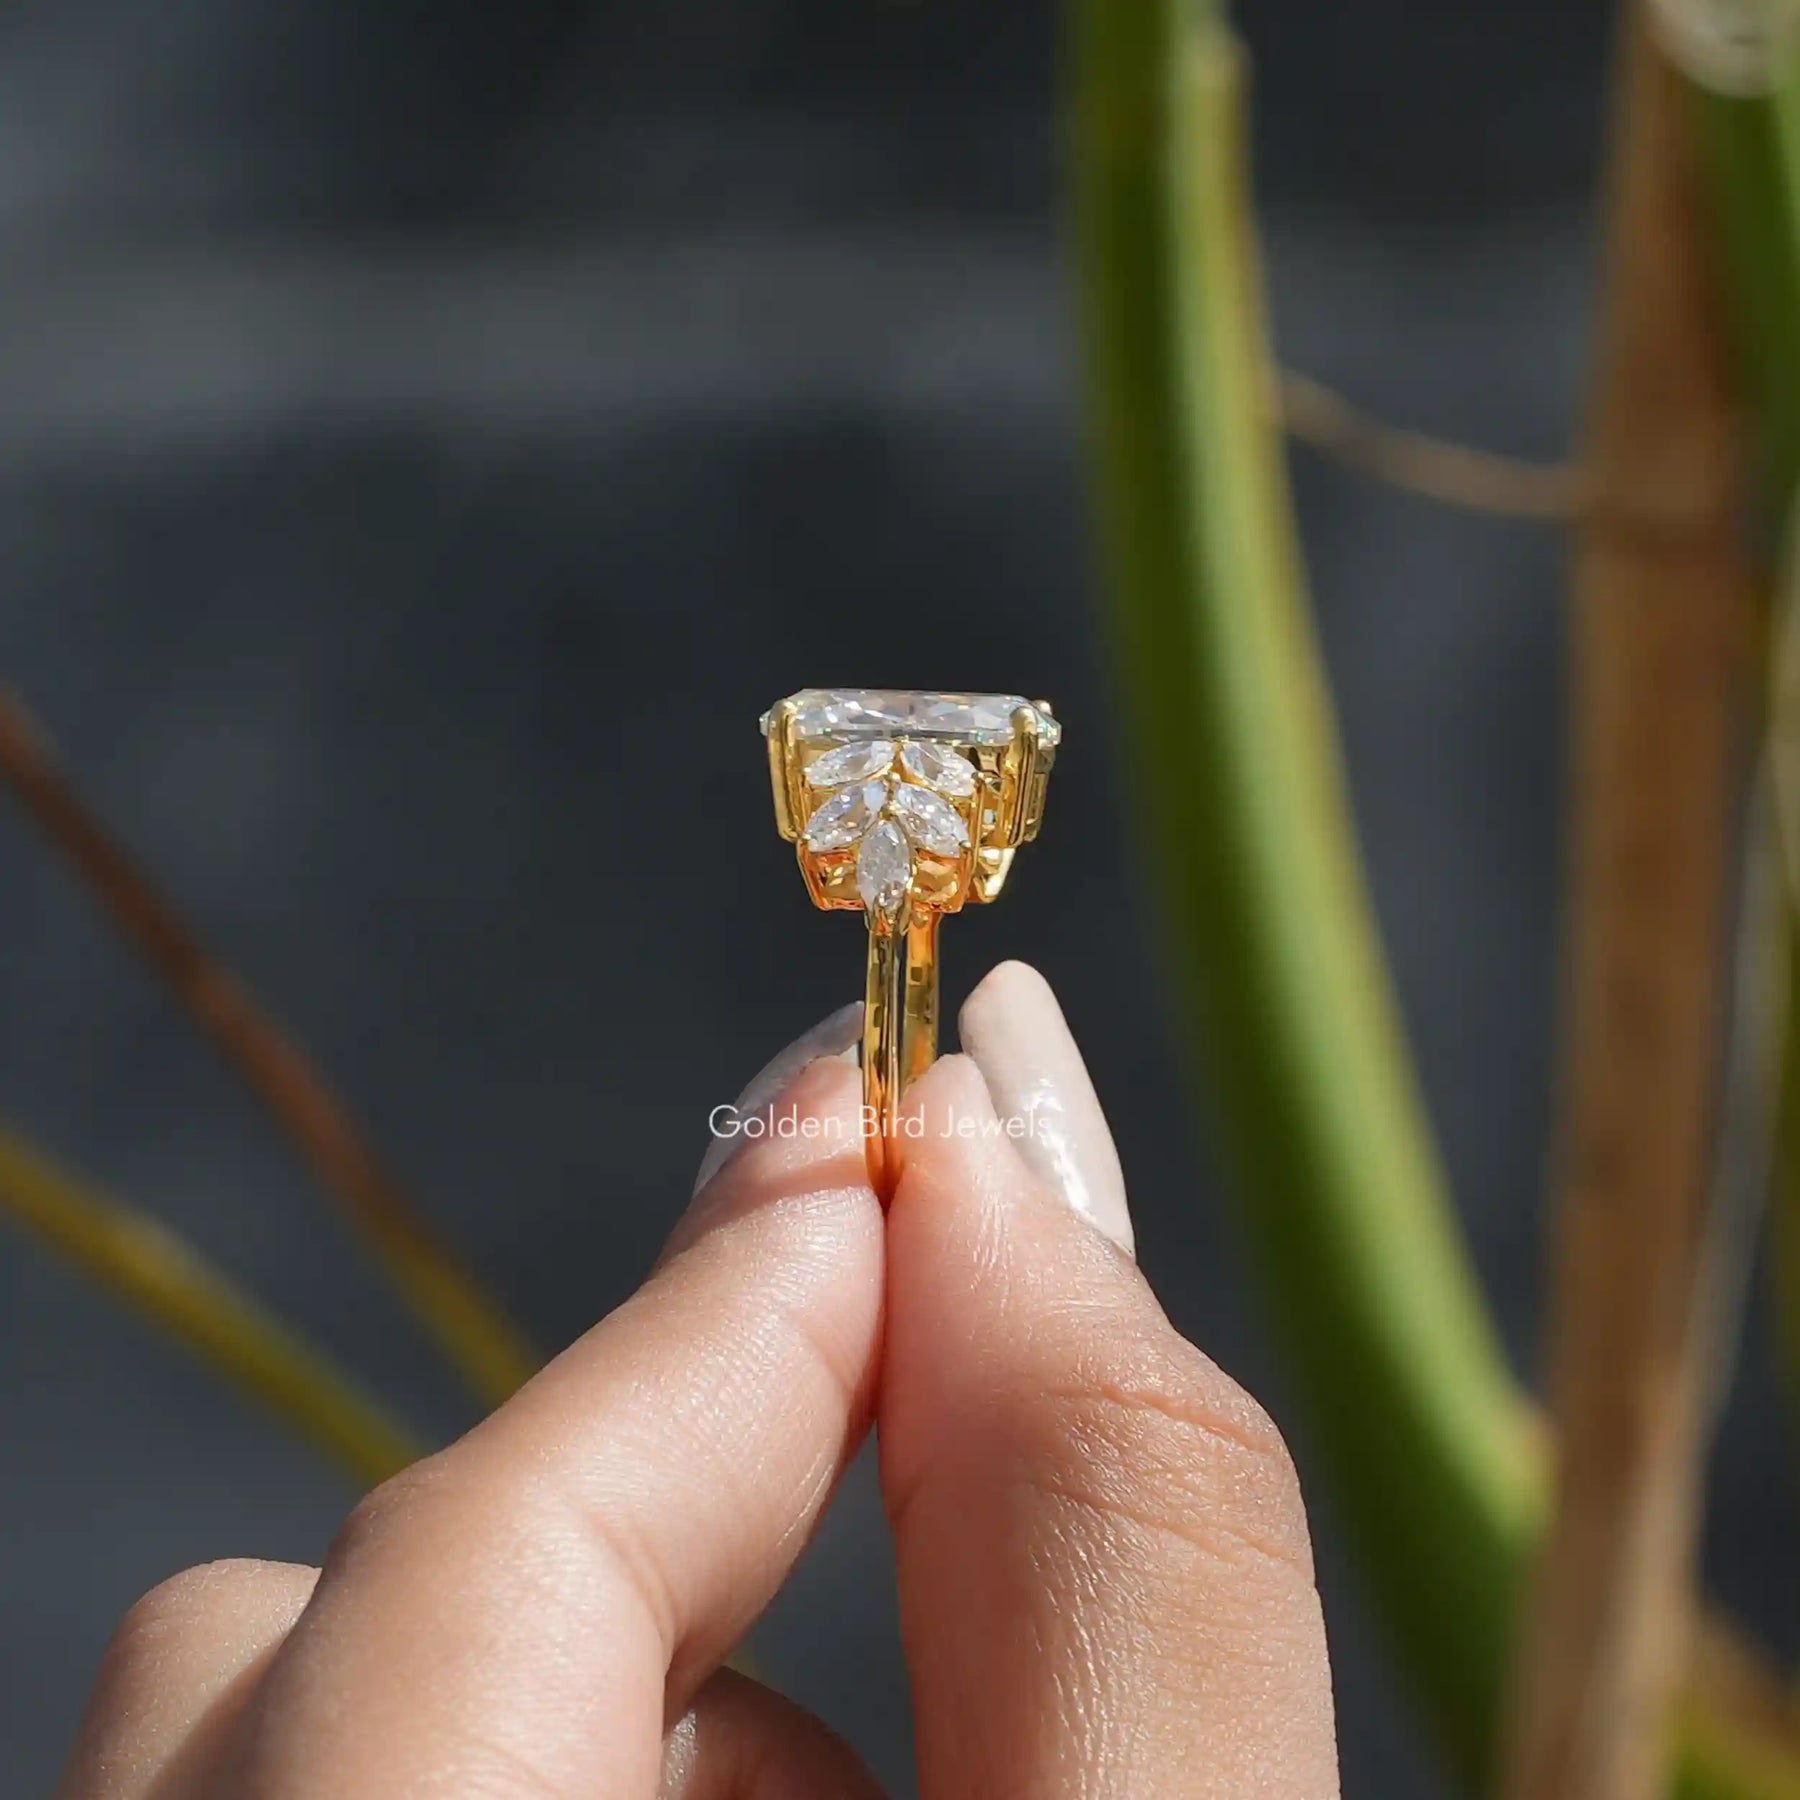 [Cluster Oval Cut Moissanite Vintage Style Engagement Ring]-[Golden Bird Jewels]